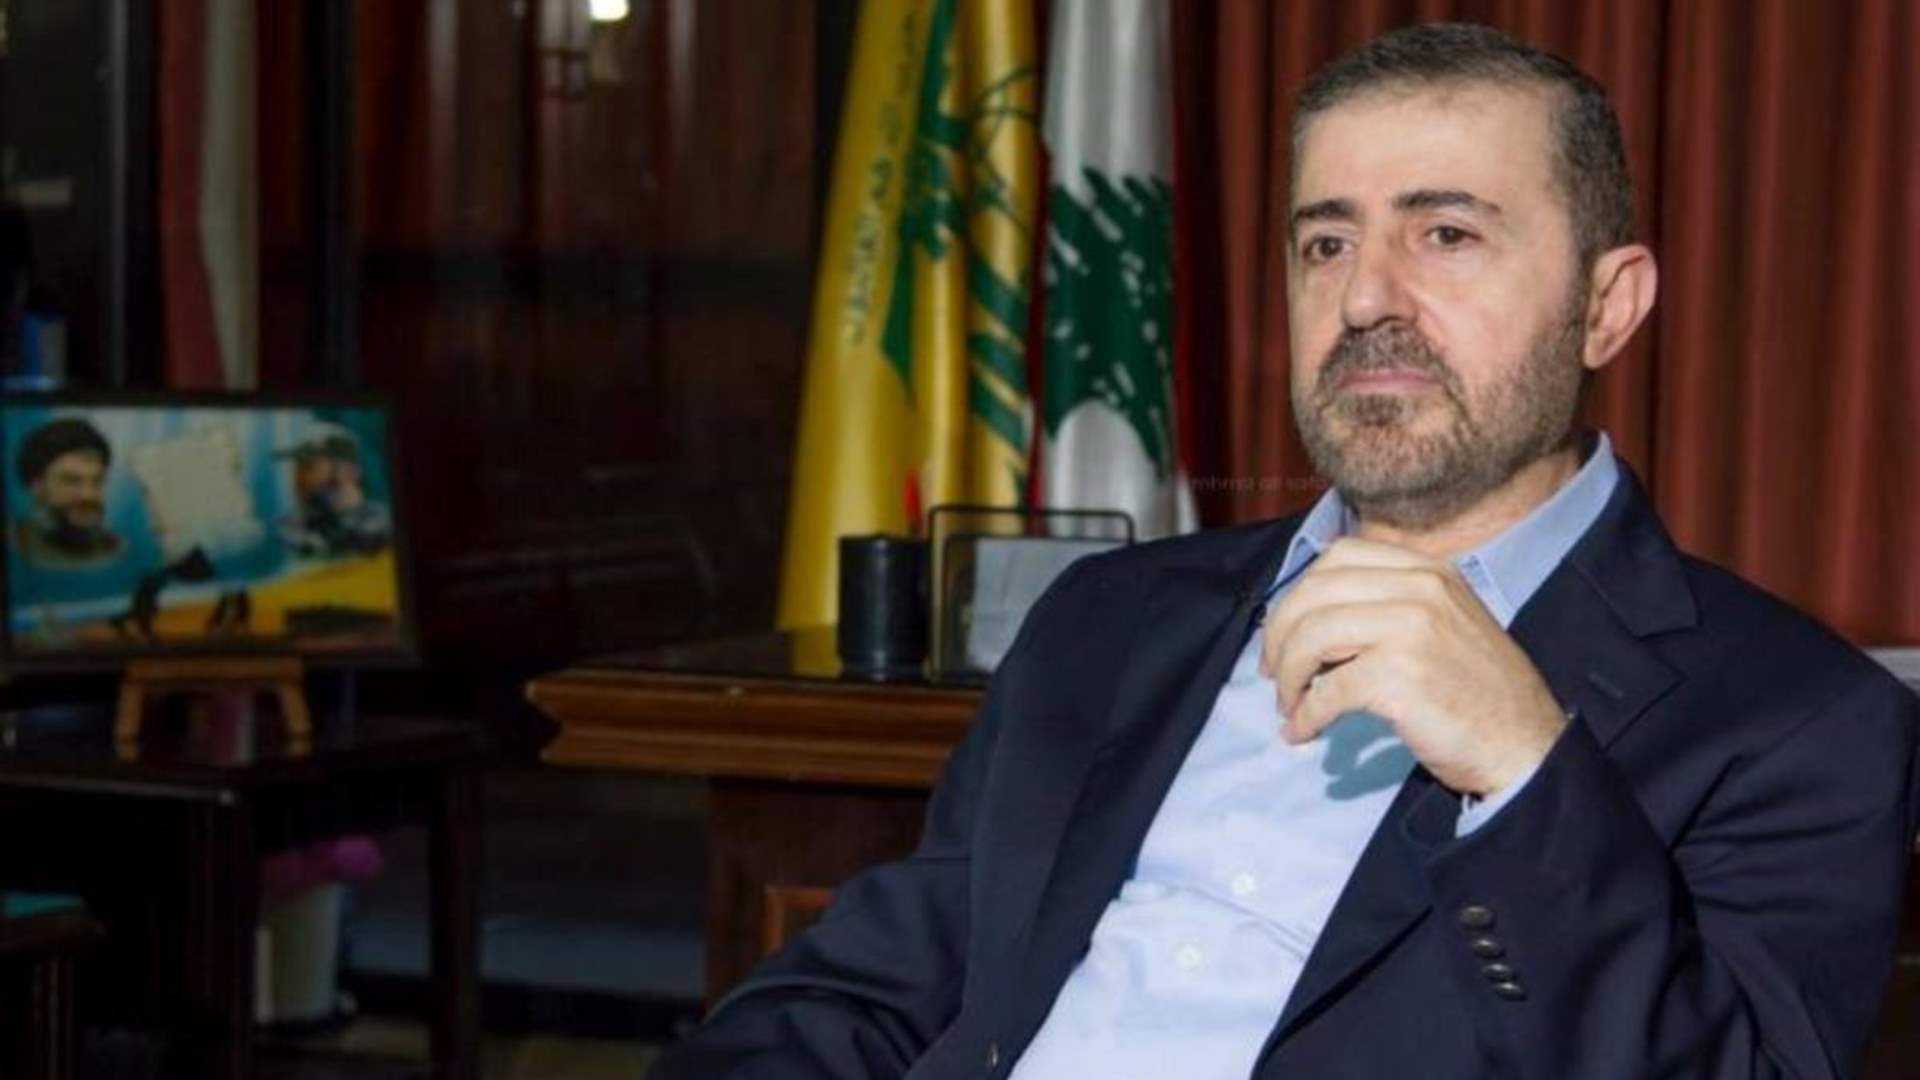 Hezbollah&#39;s top official, Wafiq Safa, departs for the Emirates on private jet